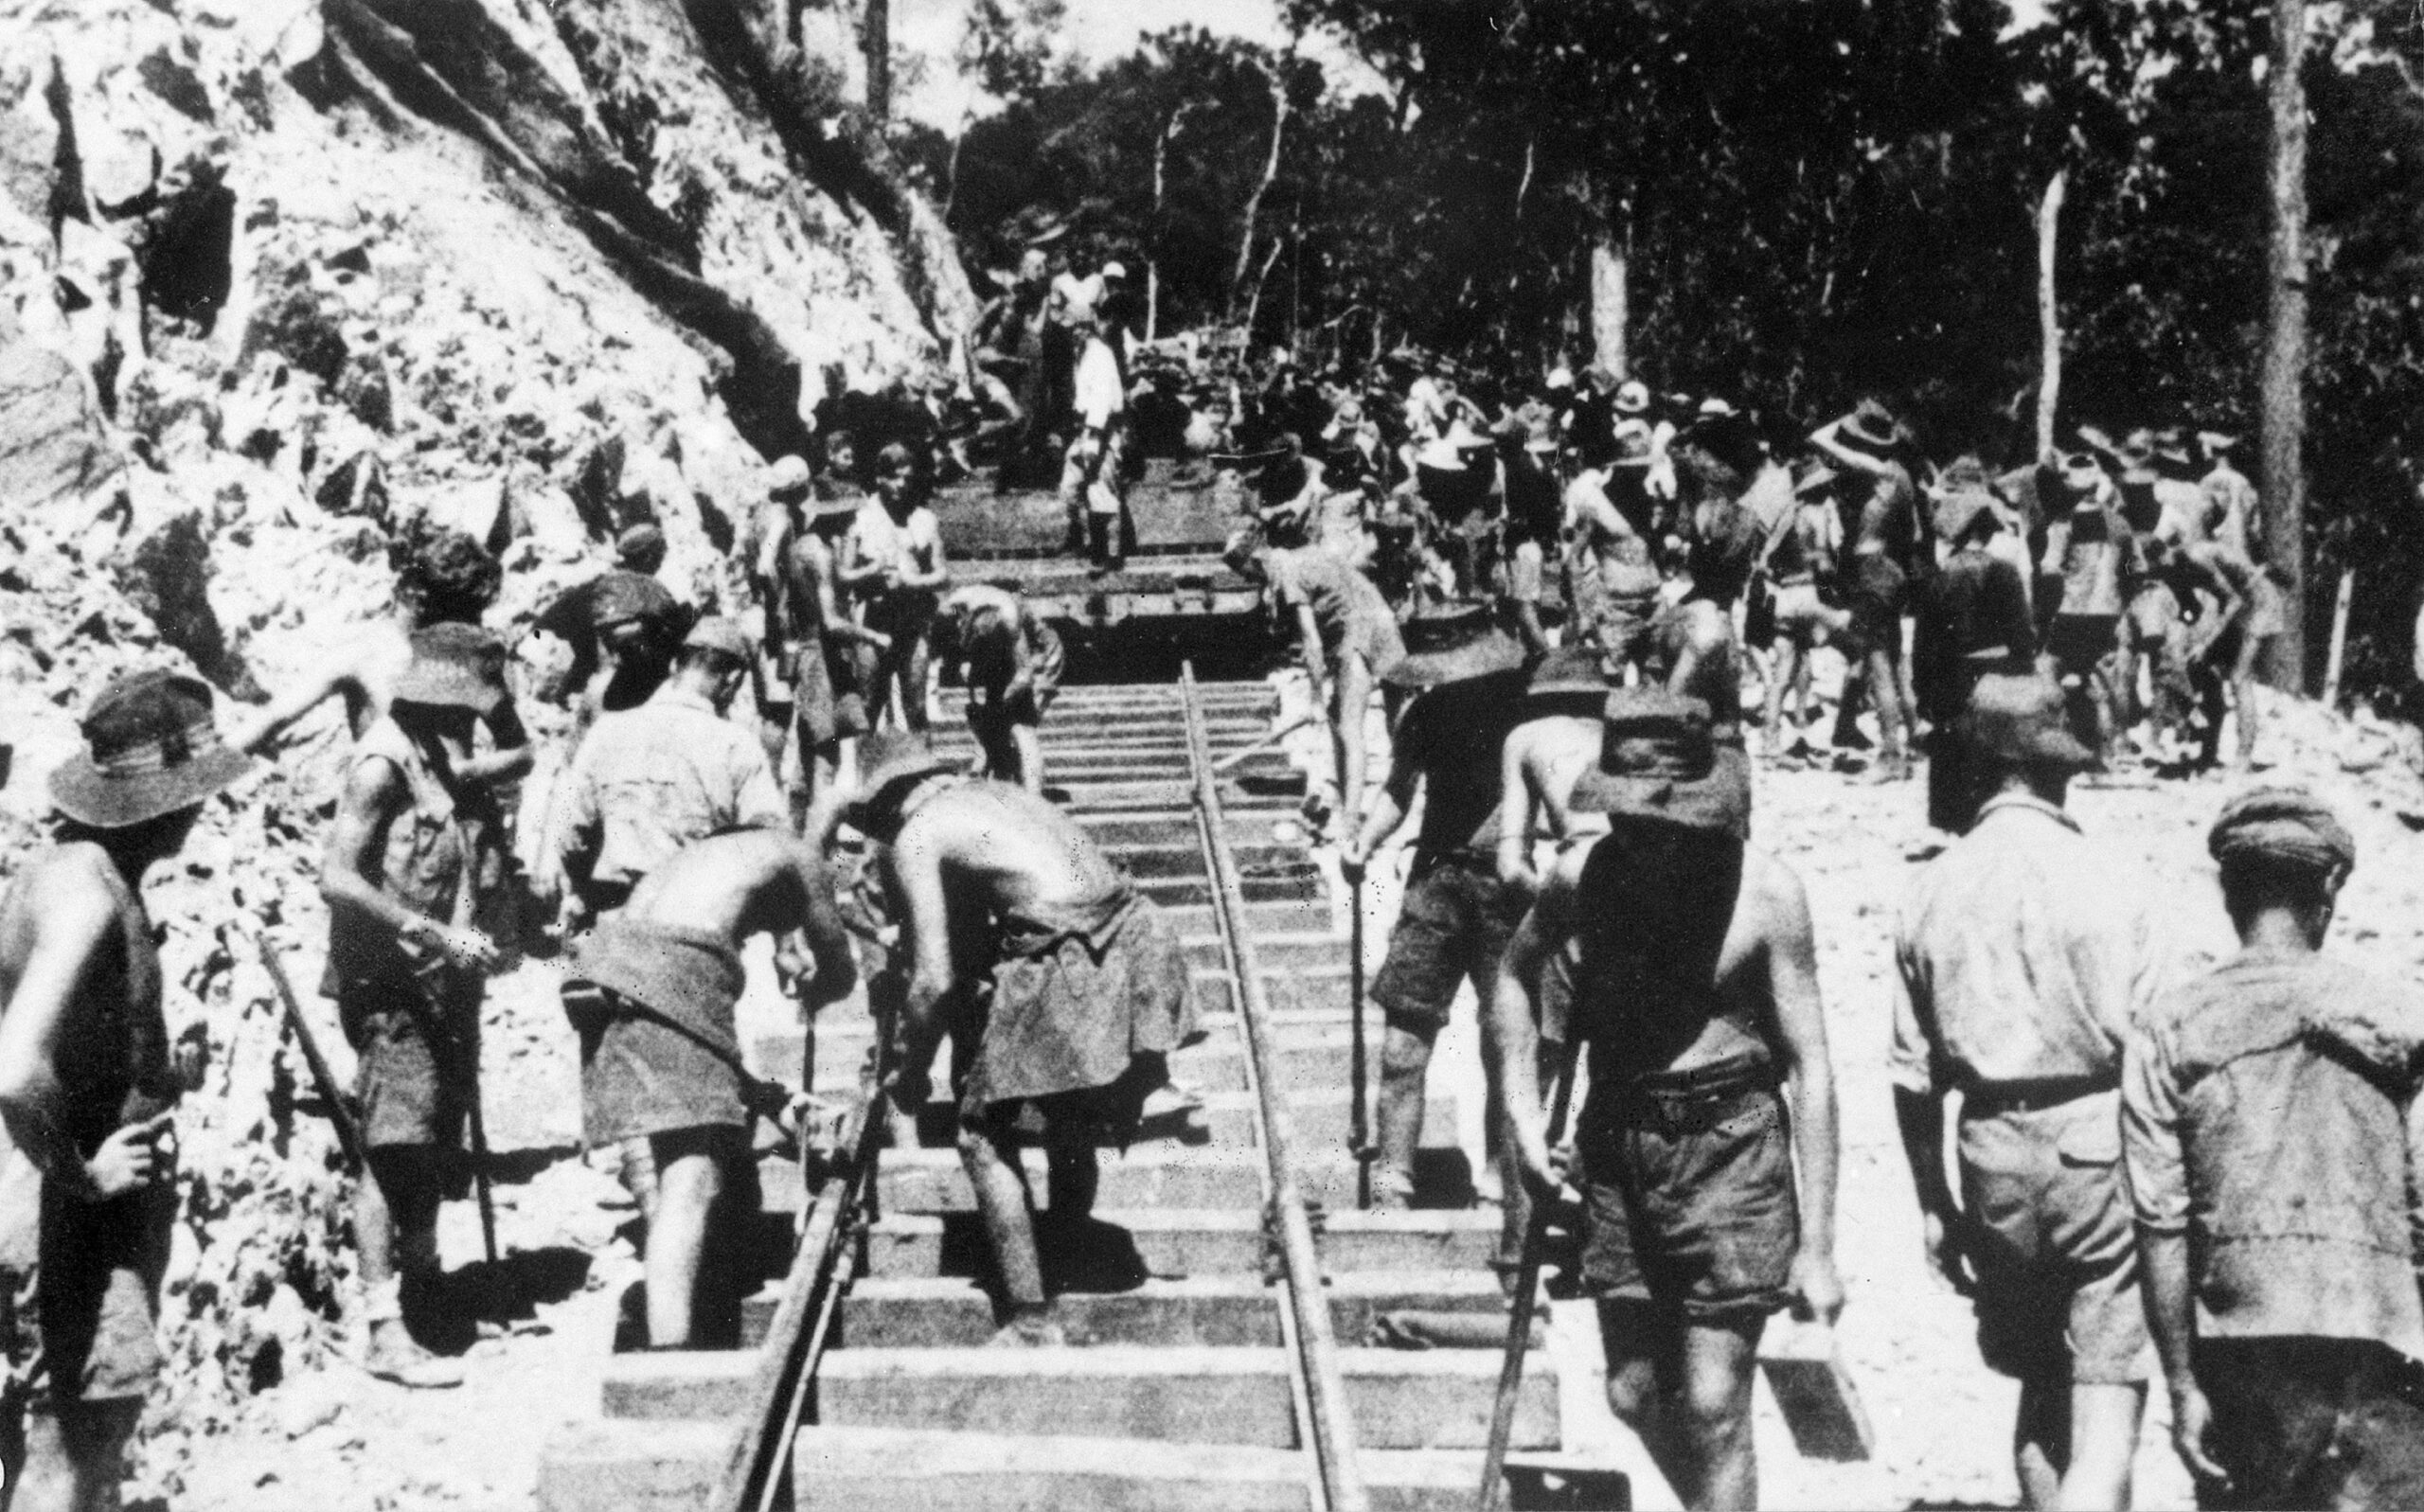 Australian and British prisoners lay track on the Burma-Thailand Railway in sweltering jungle heat. Another group of prisoners, mostly Americans, also labored on the rail line.